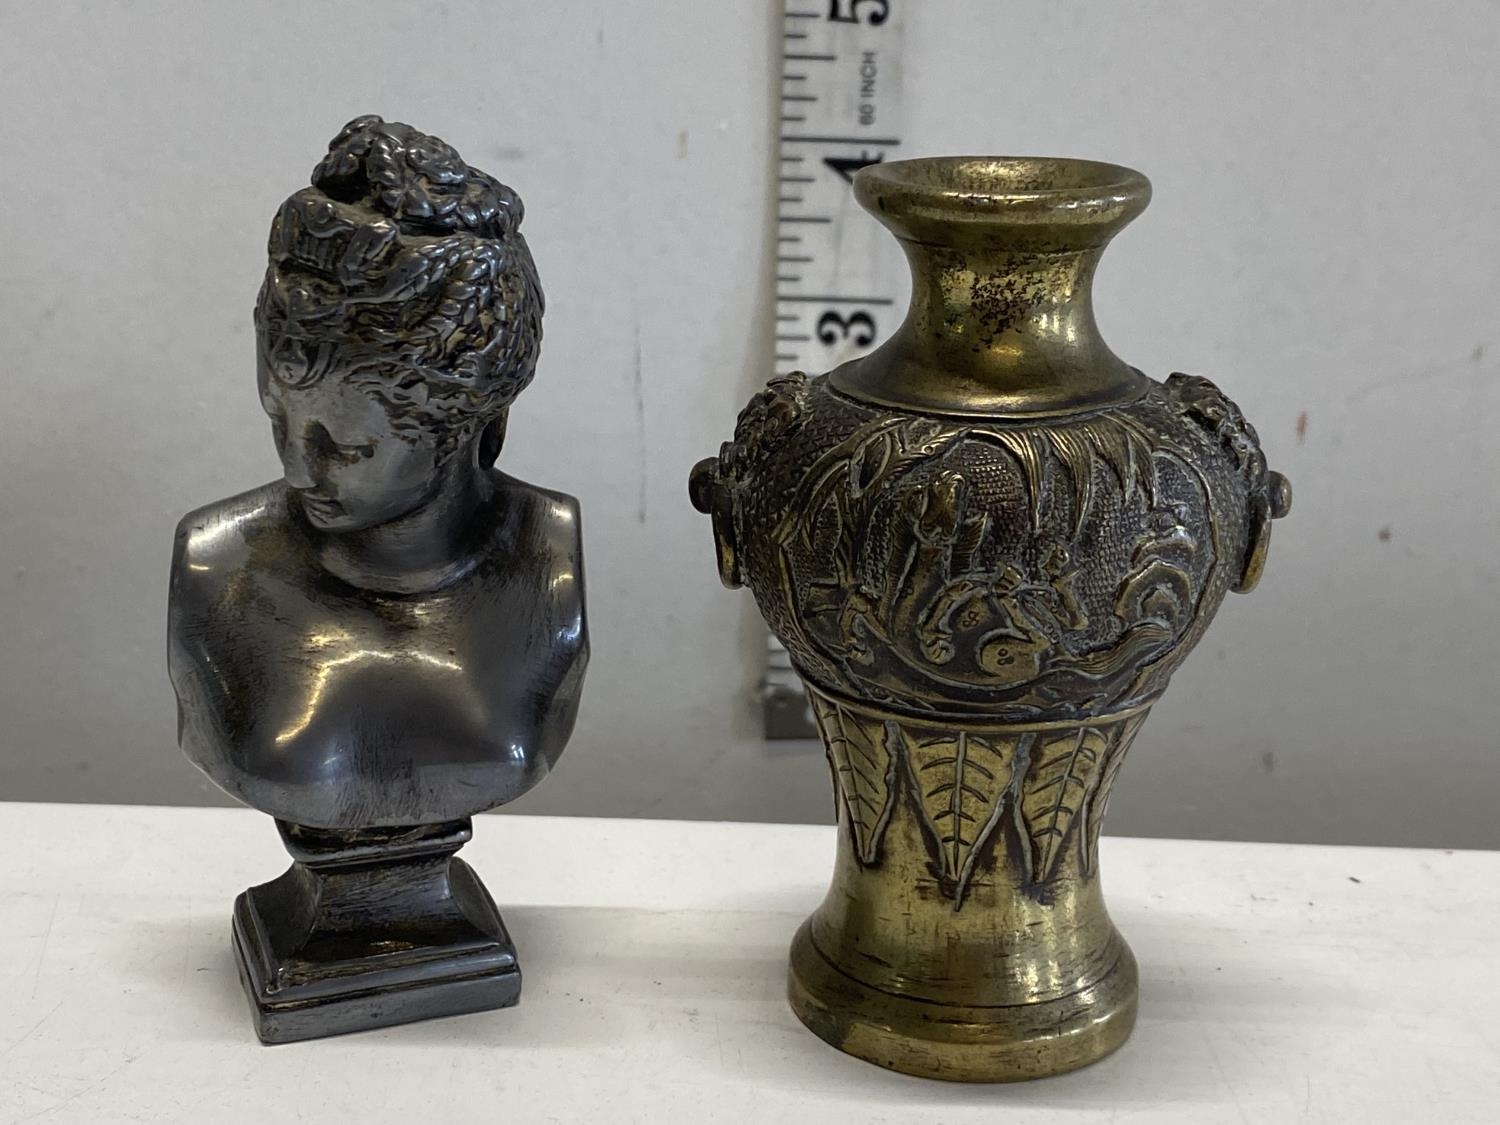 A small bronze urn and a small silvered bust of a lady